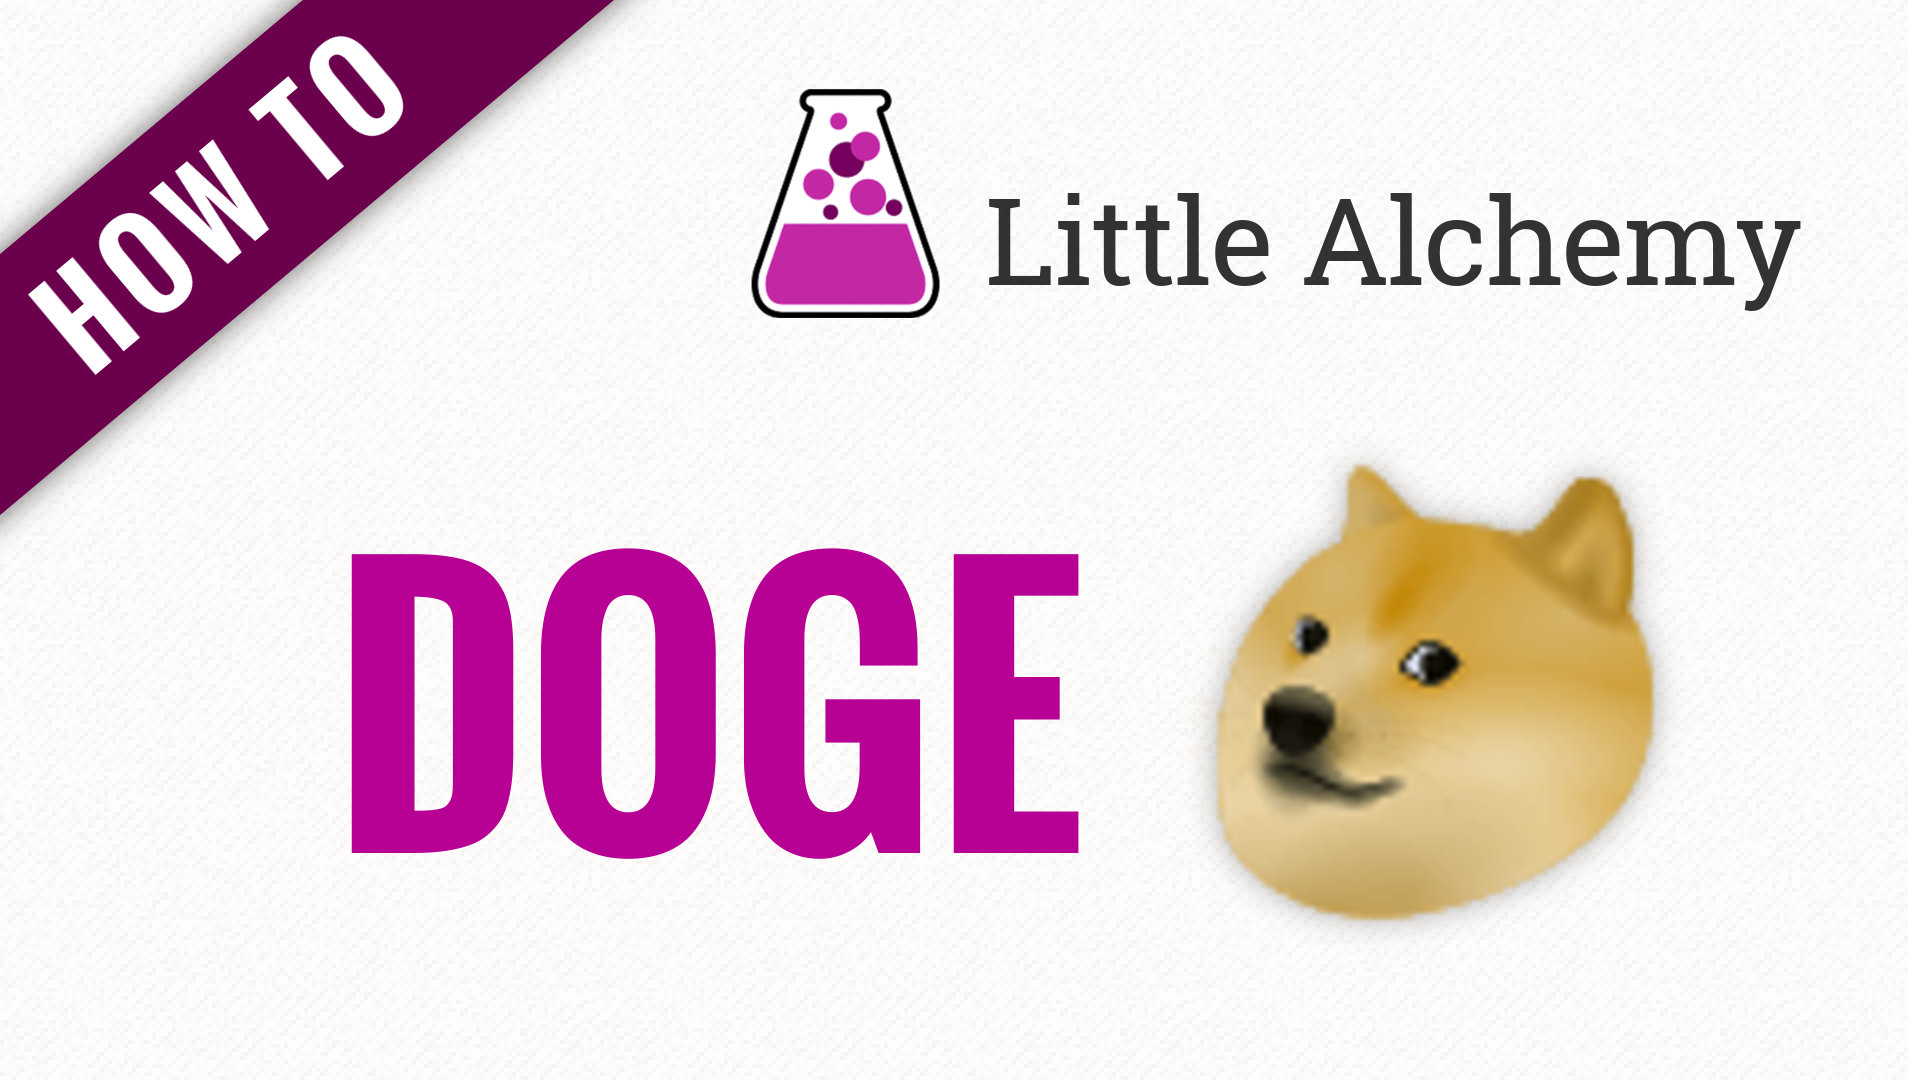 How To Create Dogecoin In Little Alchemy?